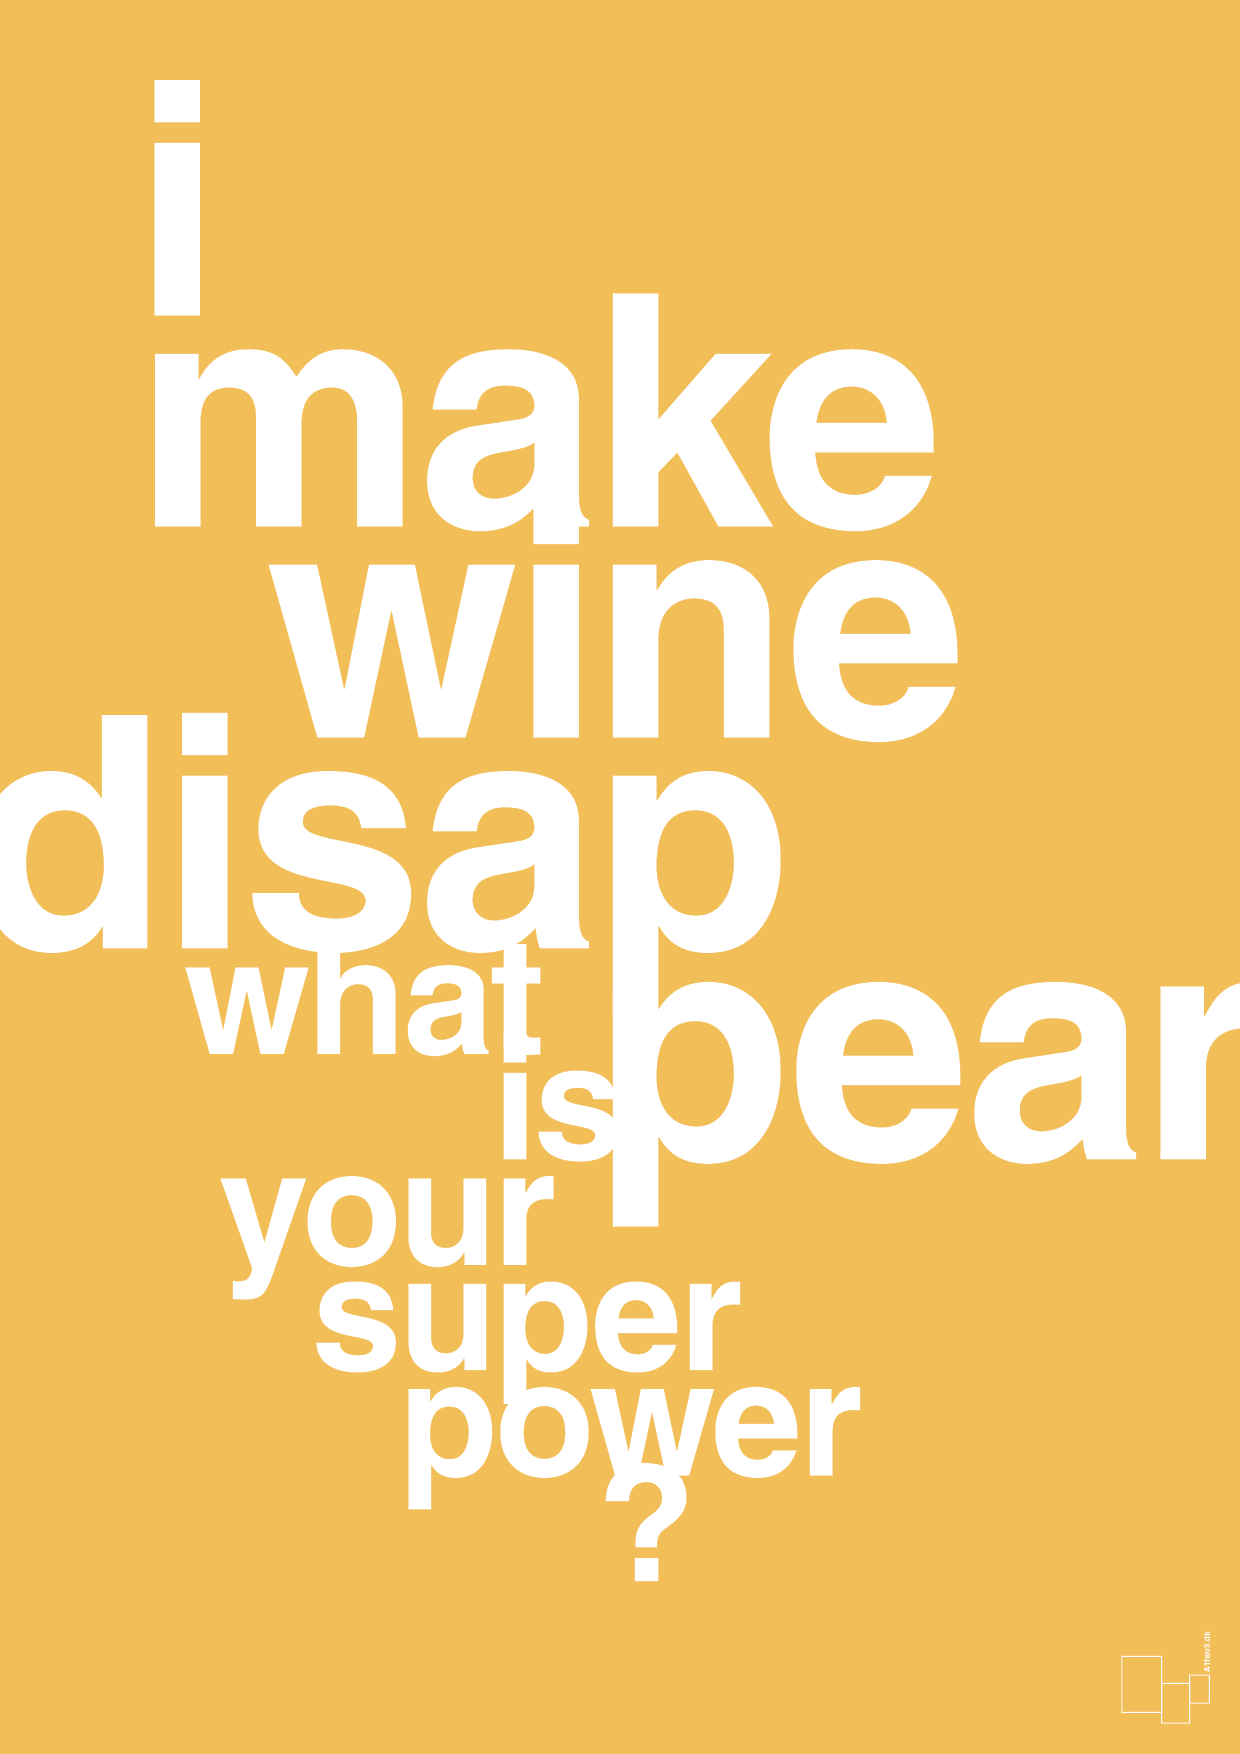 i make wine disappear what is your super power - Plakat med Mad & Drikke i Honeycomb